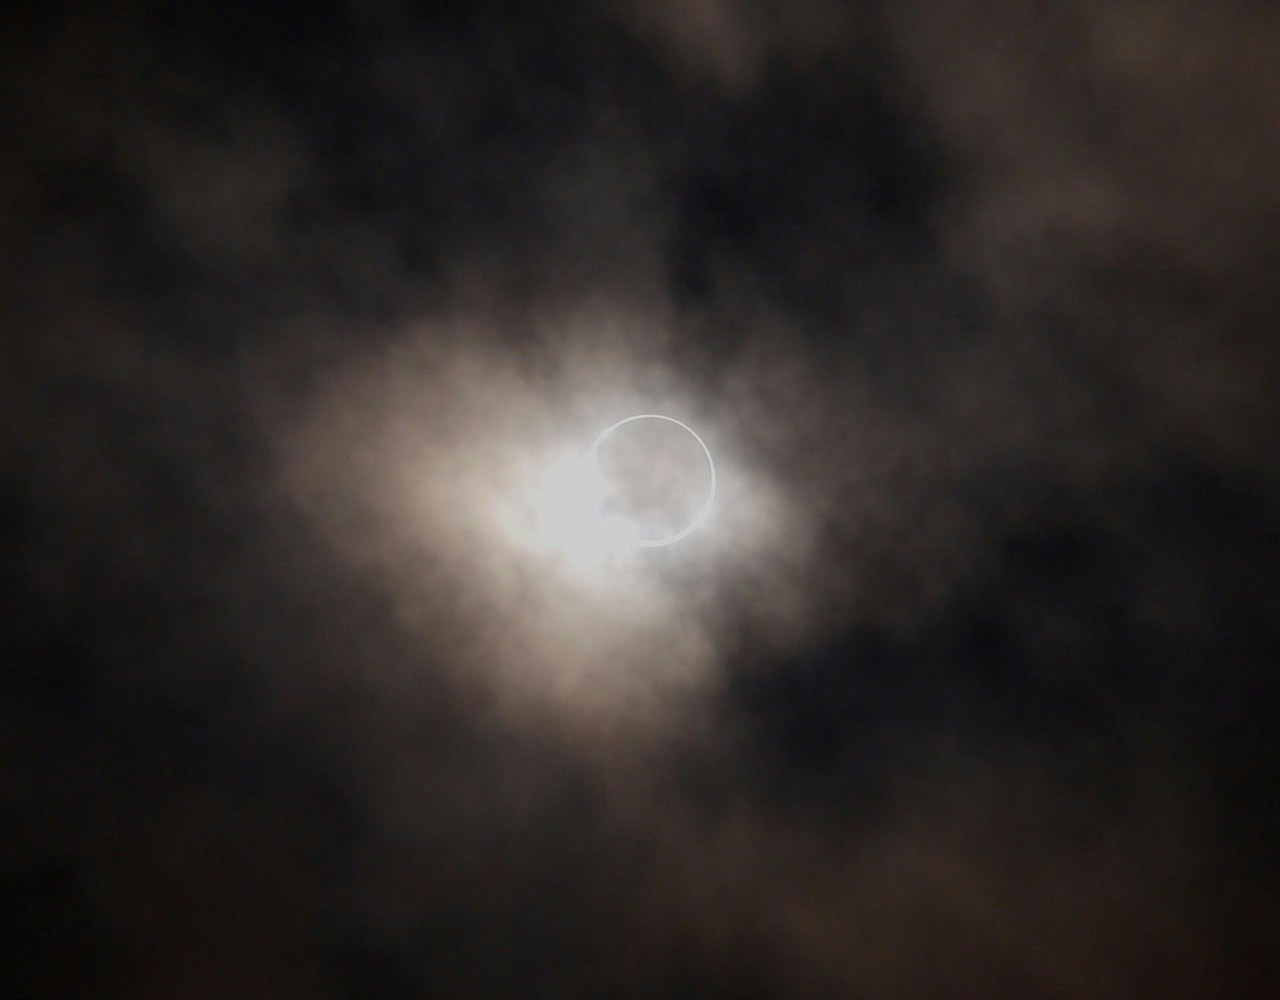 how to see the eclipse if there is hazy cloud cover